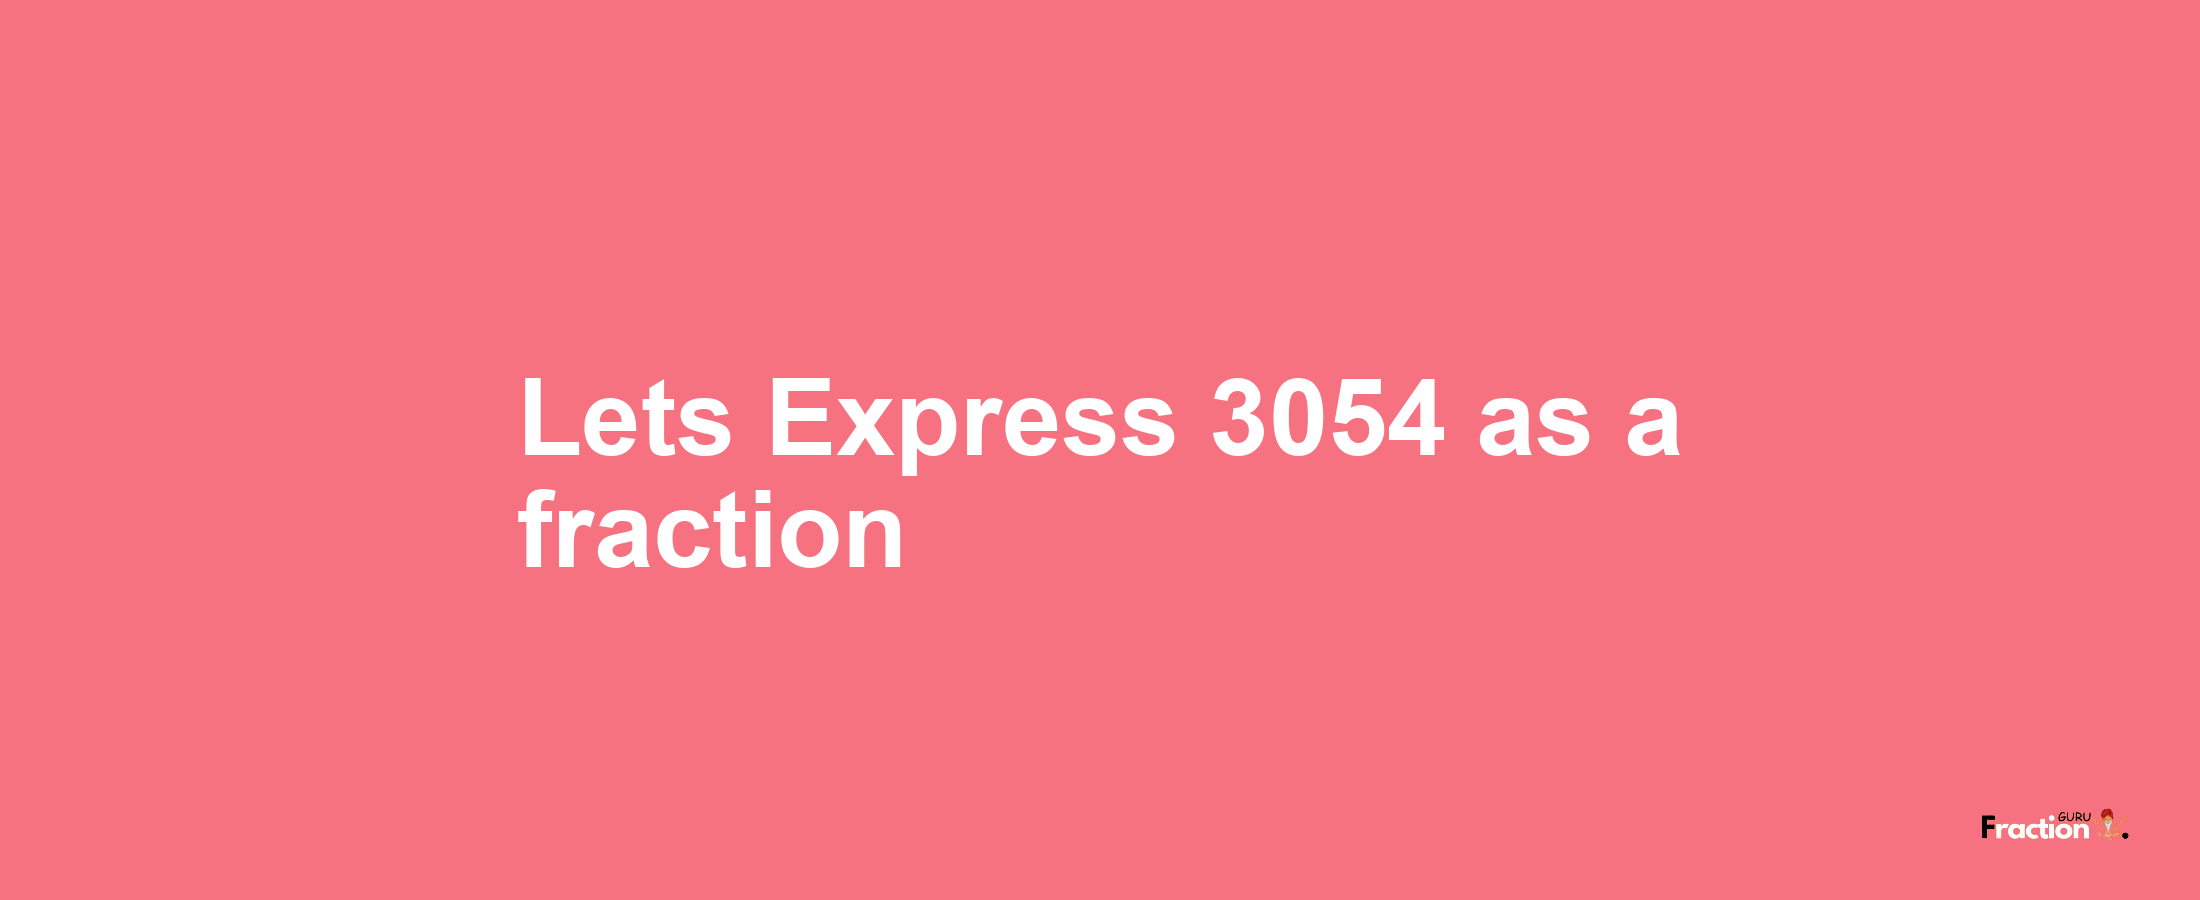 Lets Express 3054 as afraction